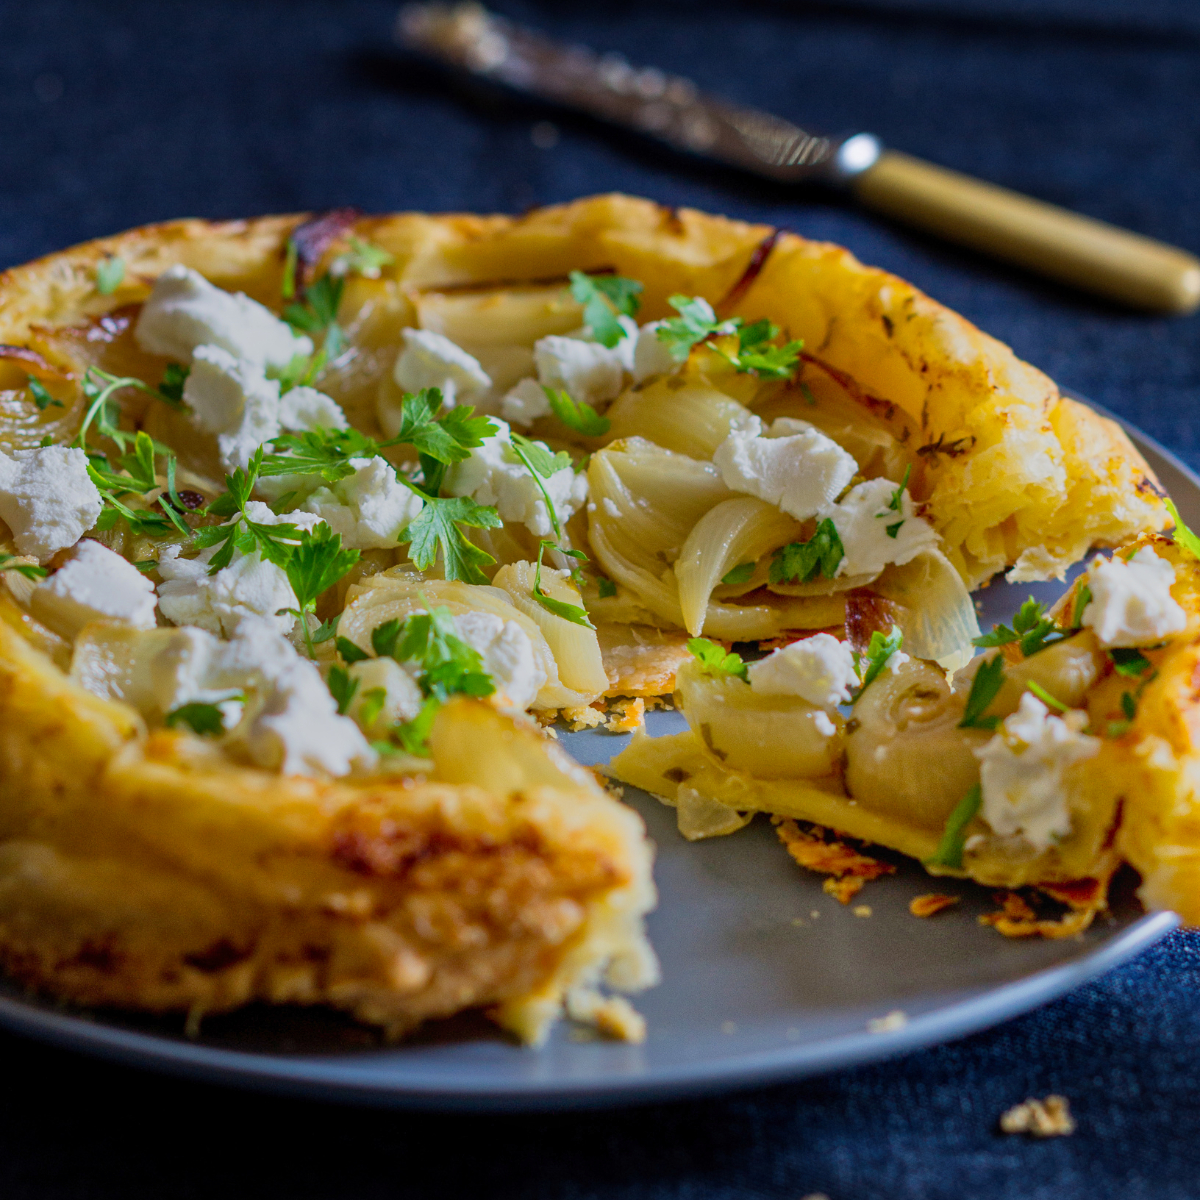 16. Roquefort Cheese and Caramelized Onion Tart RecipeFrench recipes